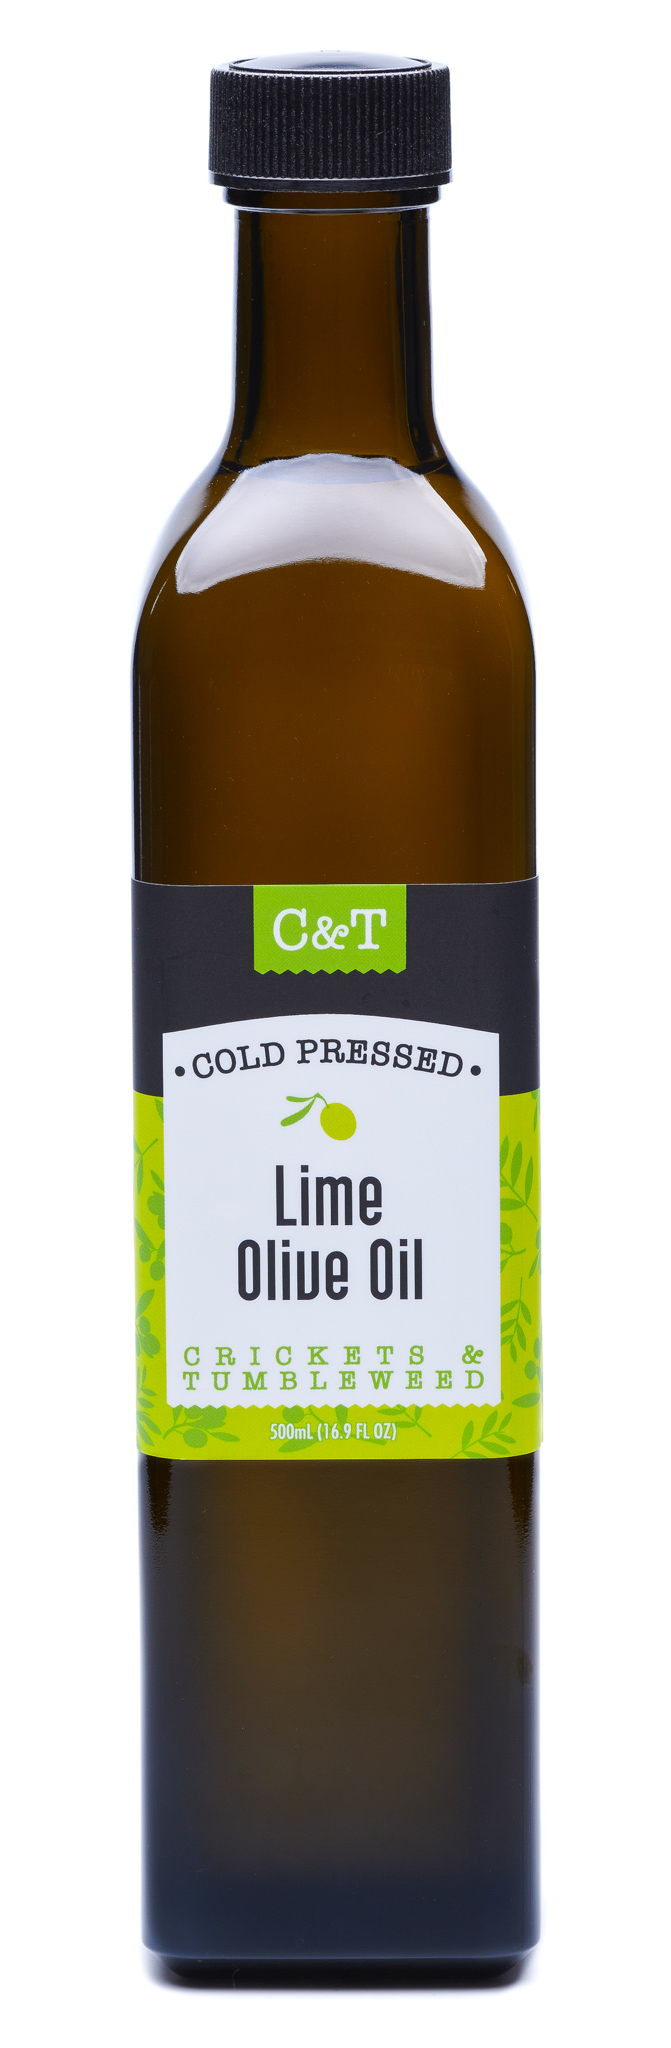 Product Image for C&T Olive Oil Lime